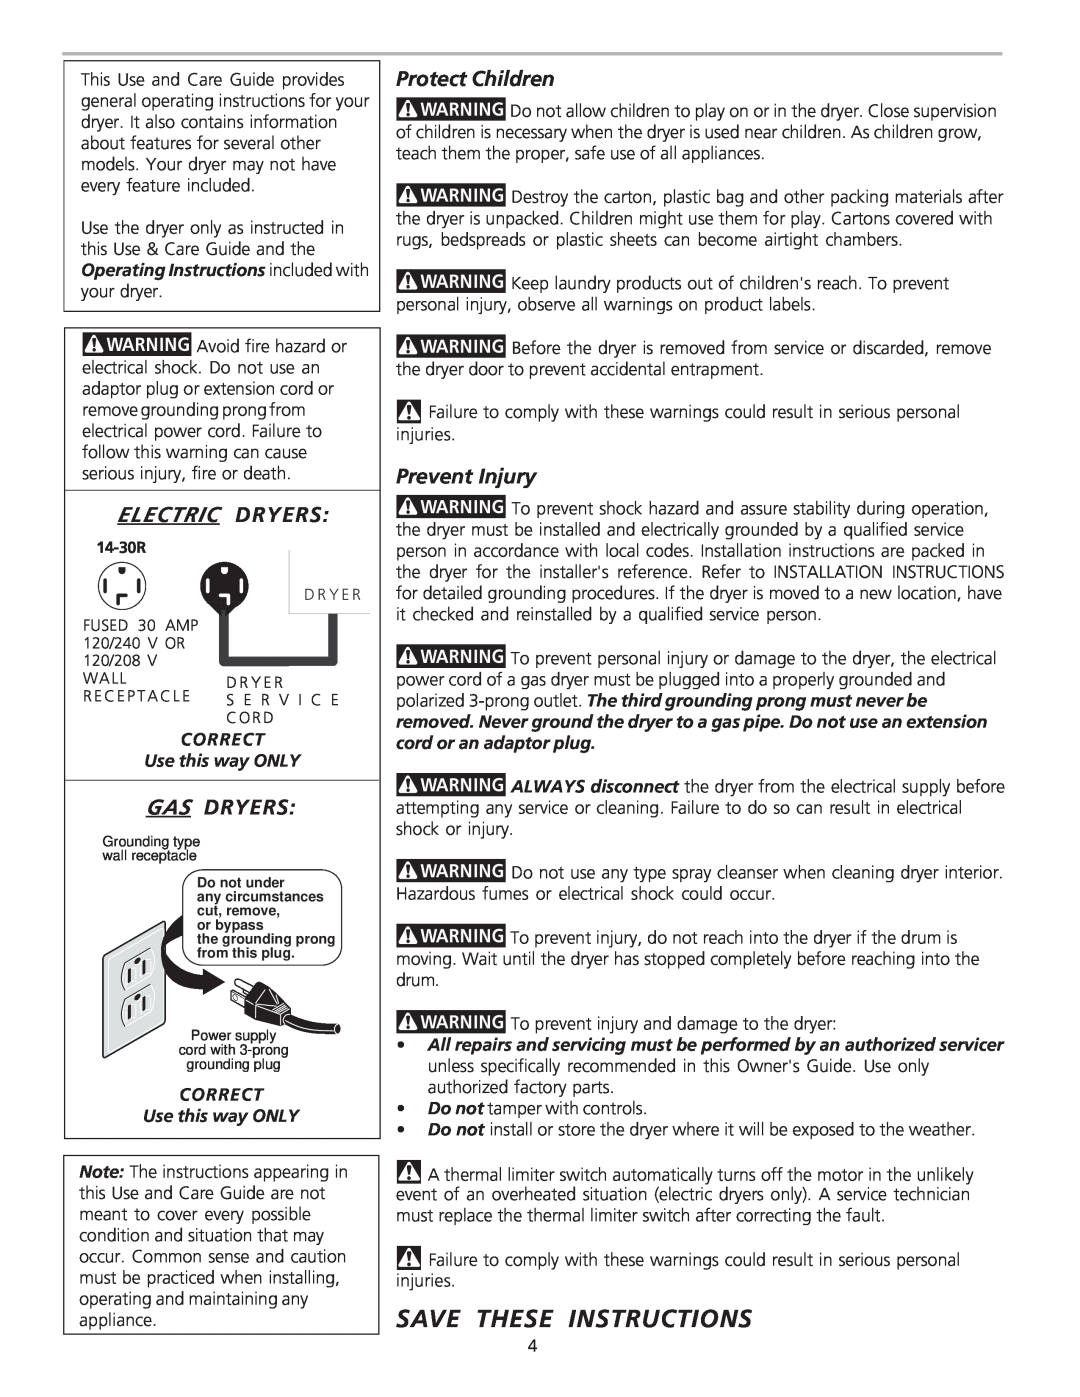 Frigidaire 134306300A warranty Save These Instructions, Electric Dryers, Protect Children, Prevent Injury, Gas Dryers 